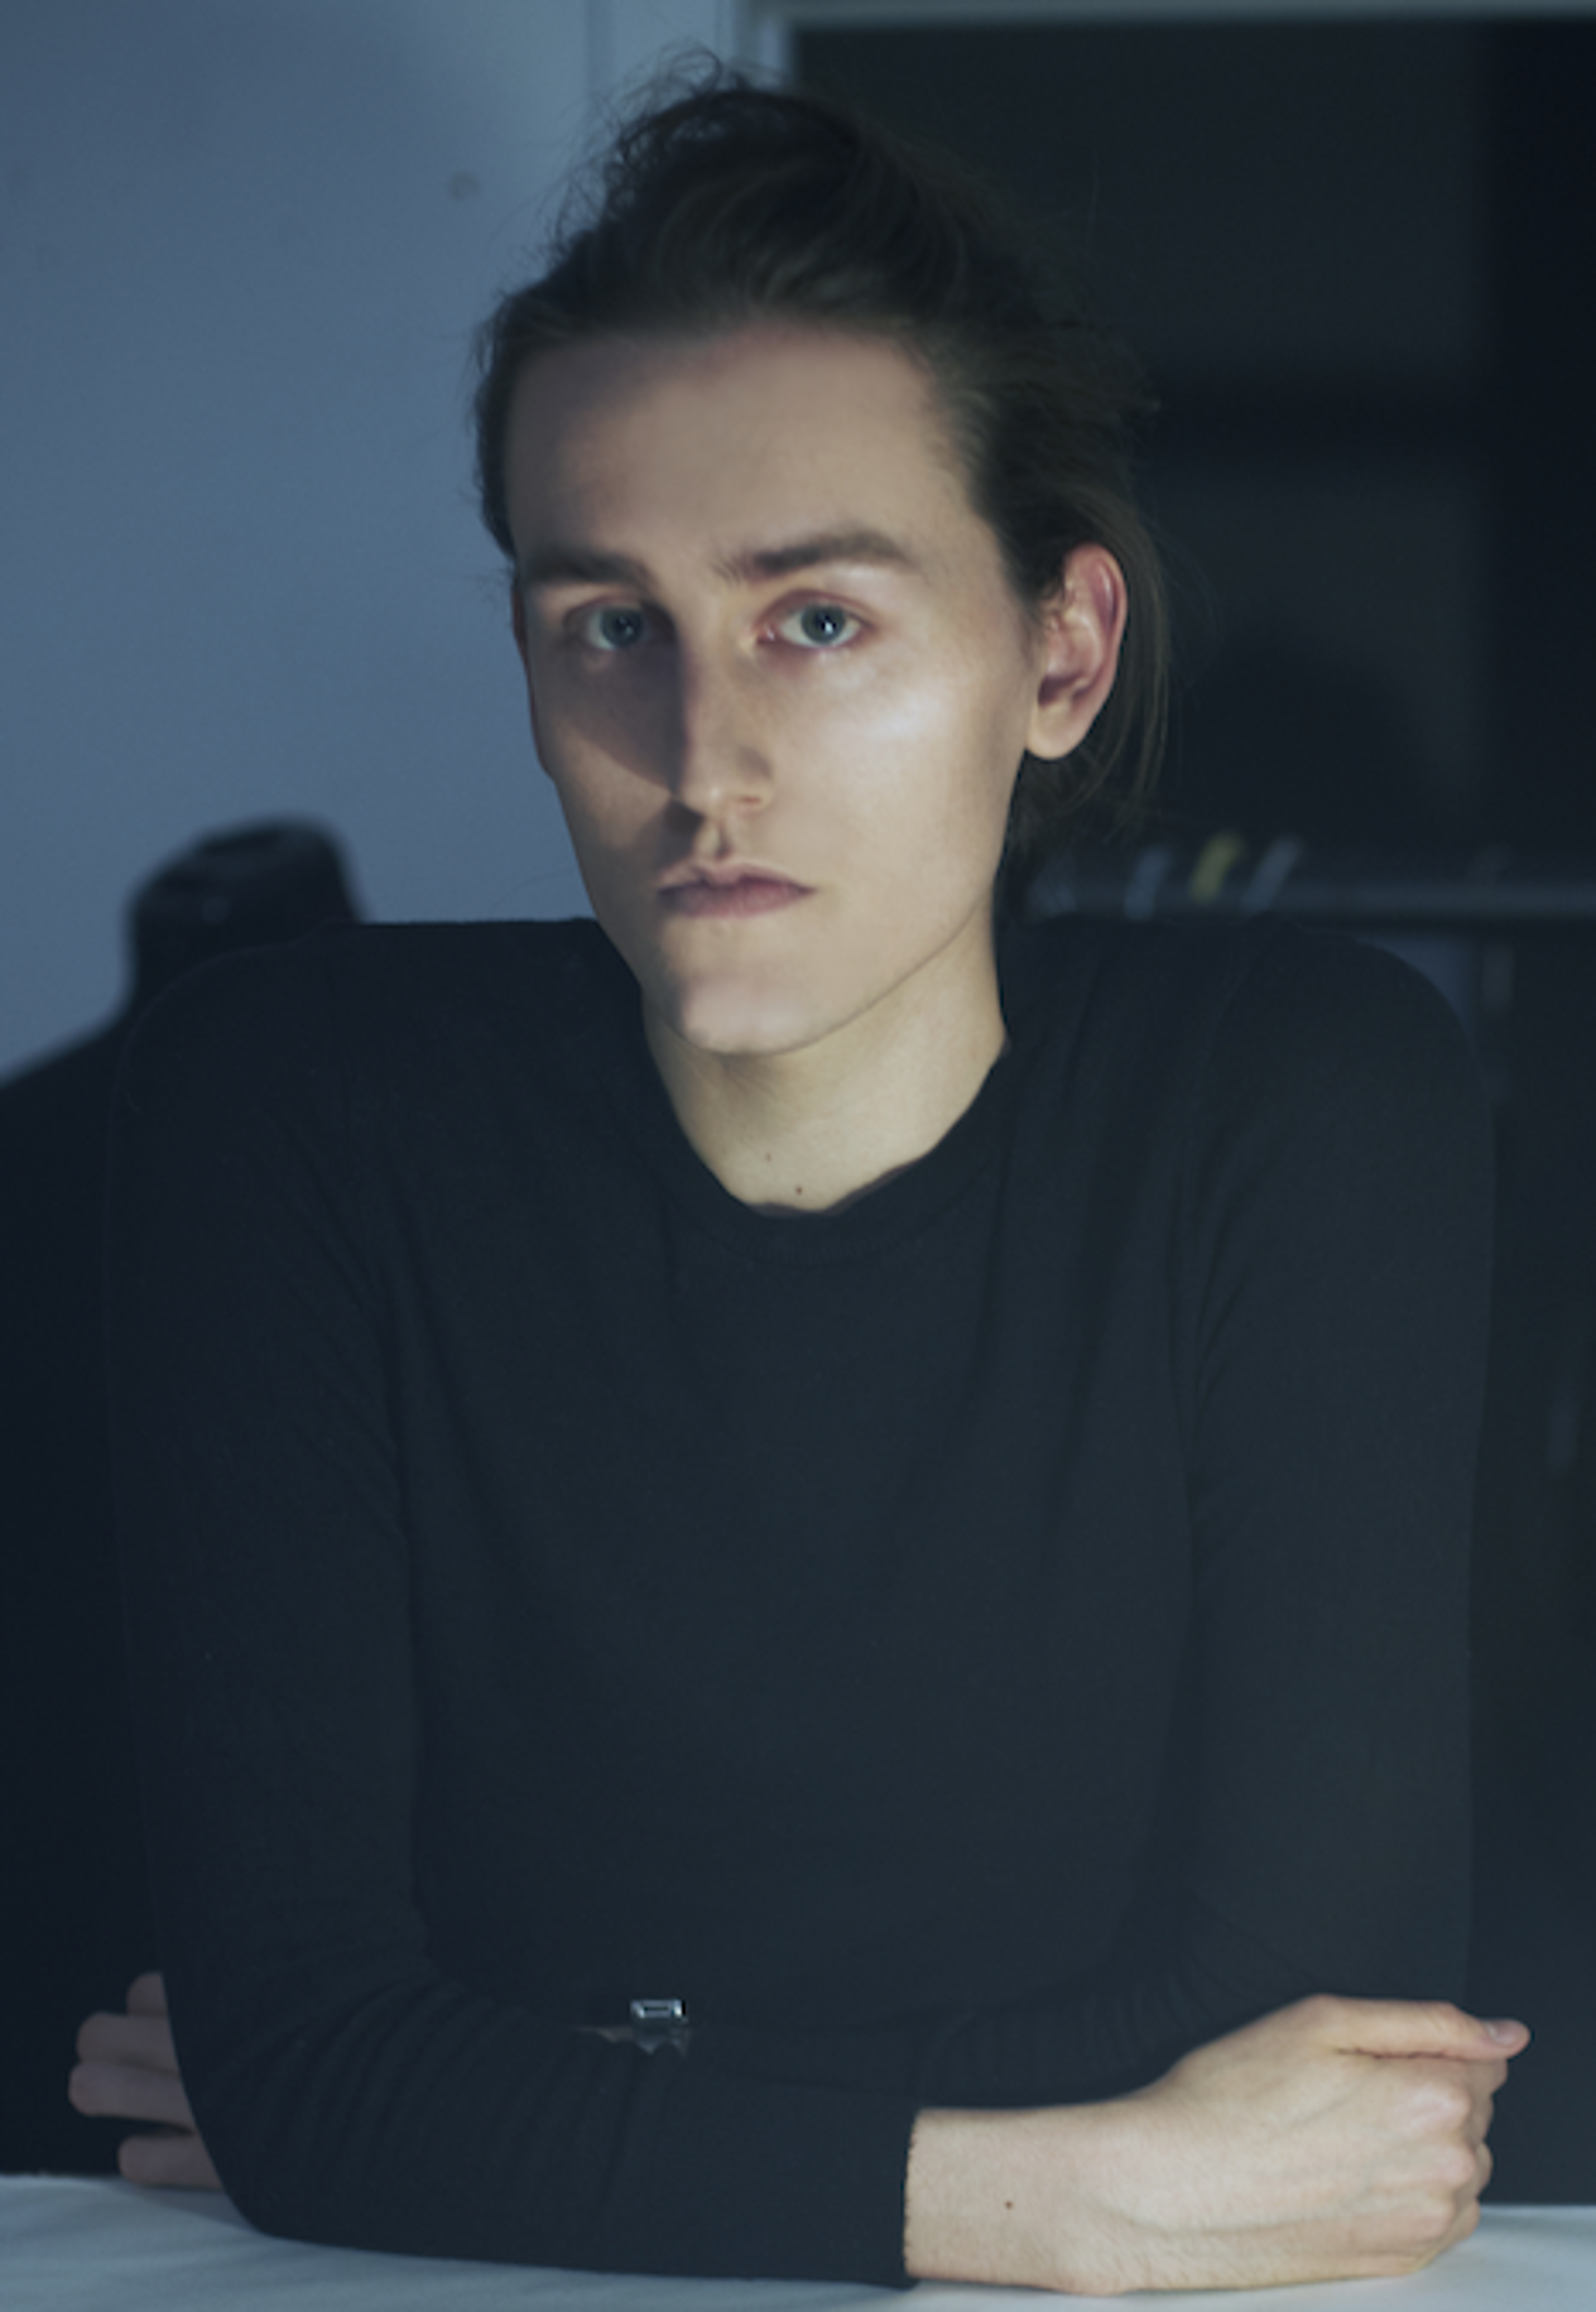 A young adult with a thoughtful expression, lit by soft, cool light, wearing a black shirt.